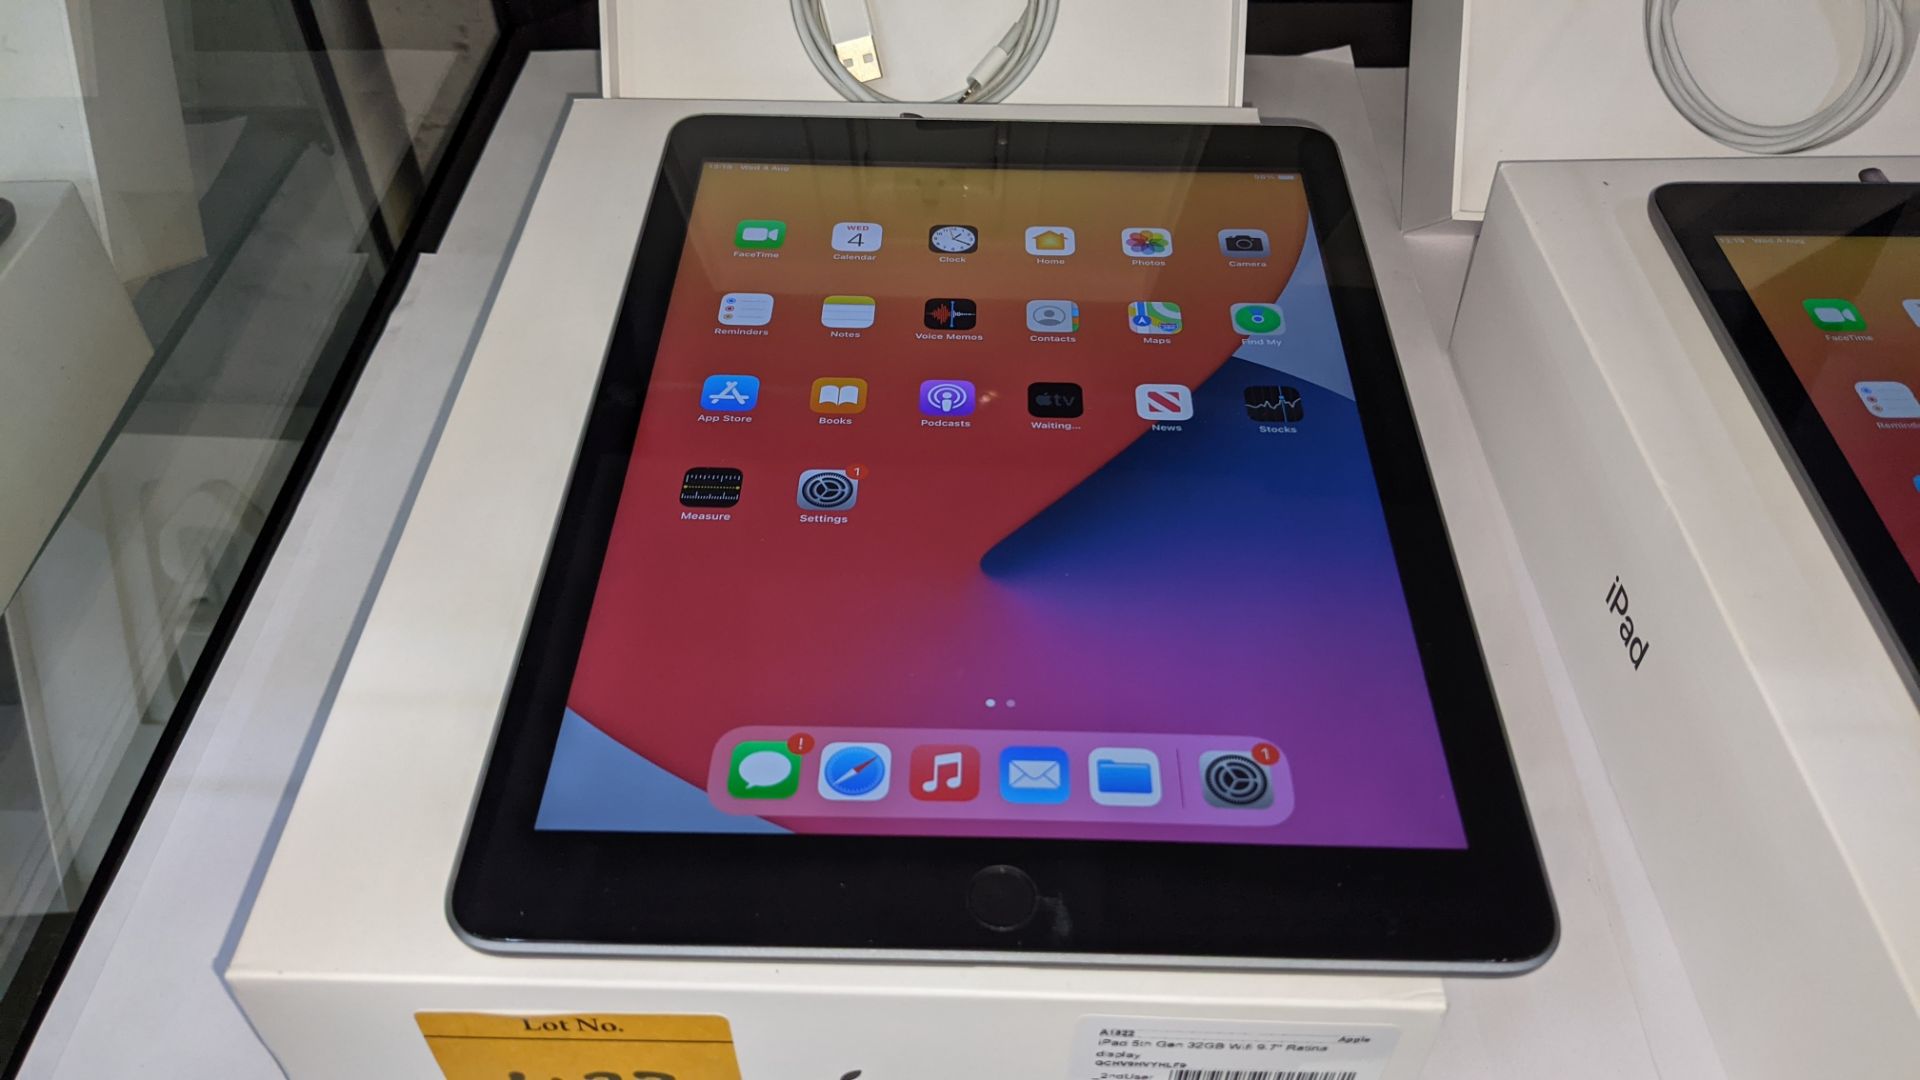 Apple iPad (space grey) 5th generation 32Gb Wi-Fi 9.7" Retina screen. Product code A1822. Apple A9 - Image 4 of 9